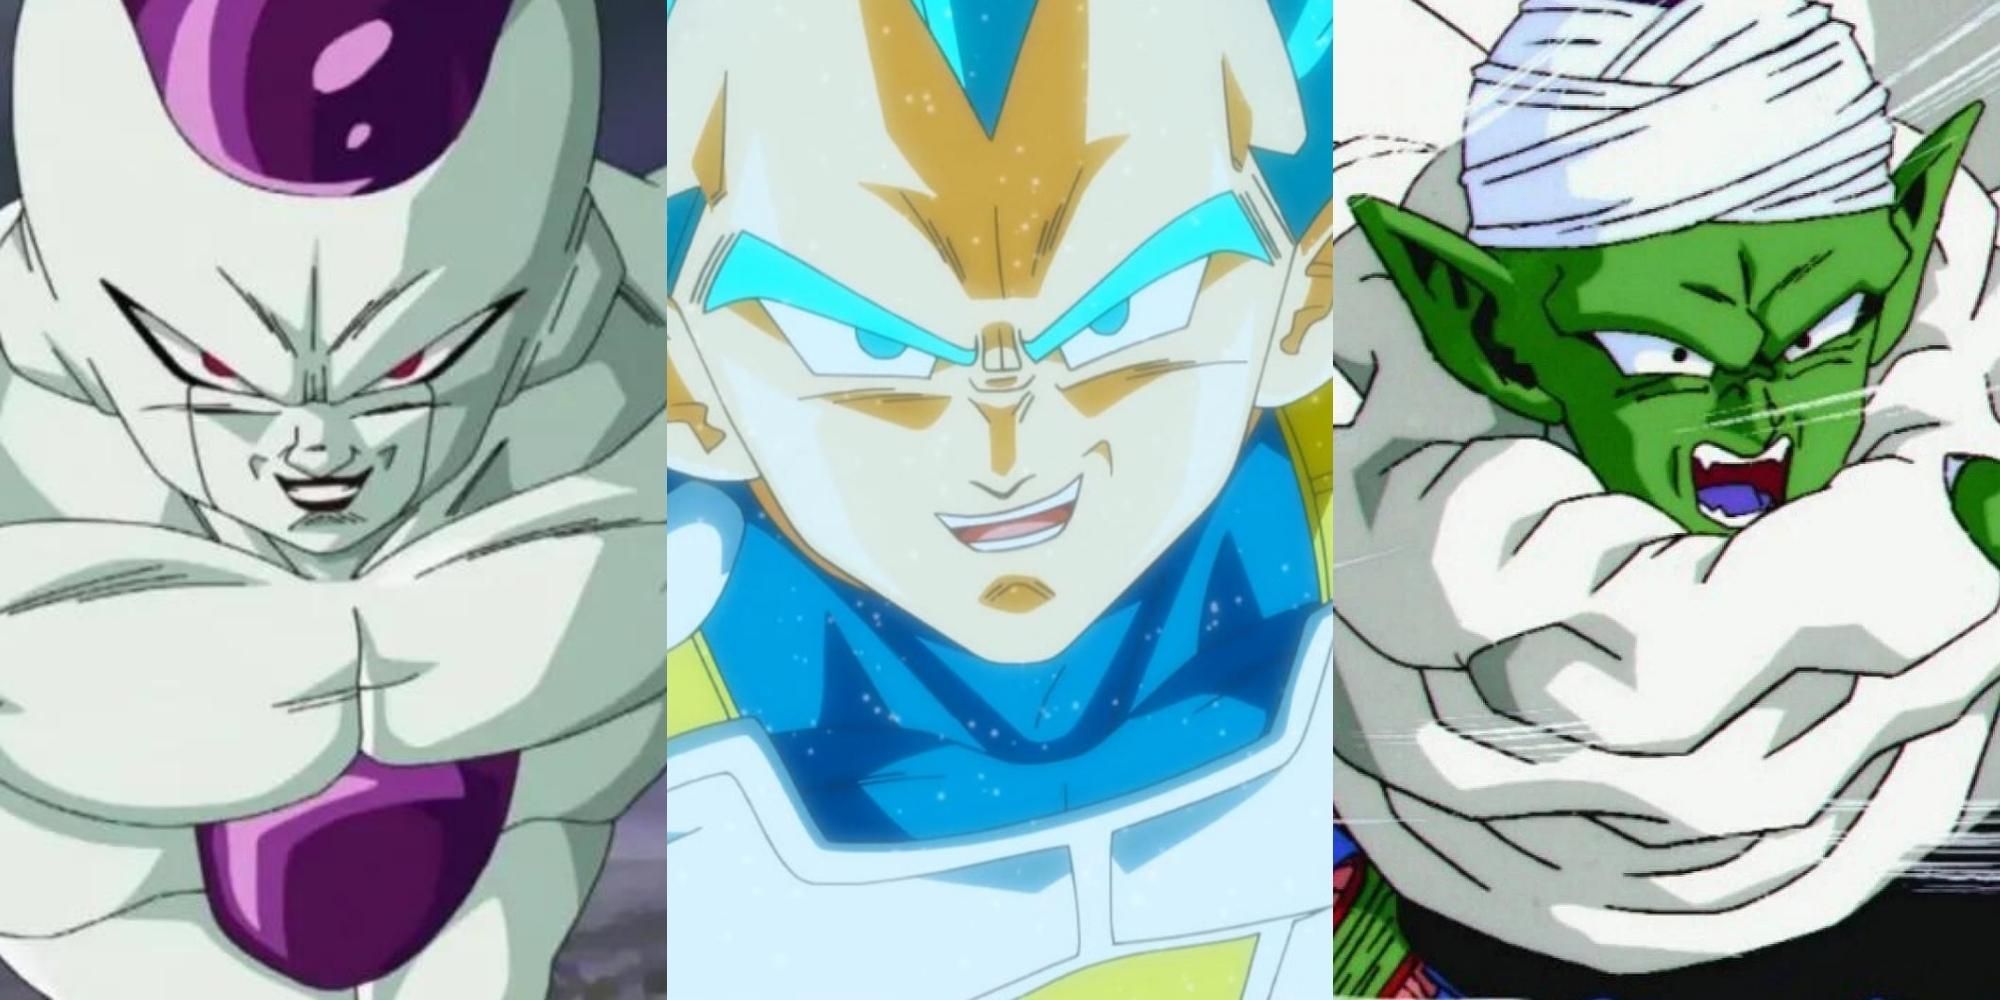 Cell, Vegeta, and Piccolo in Dragon Ball